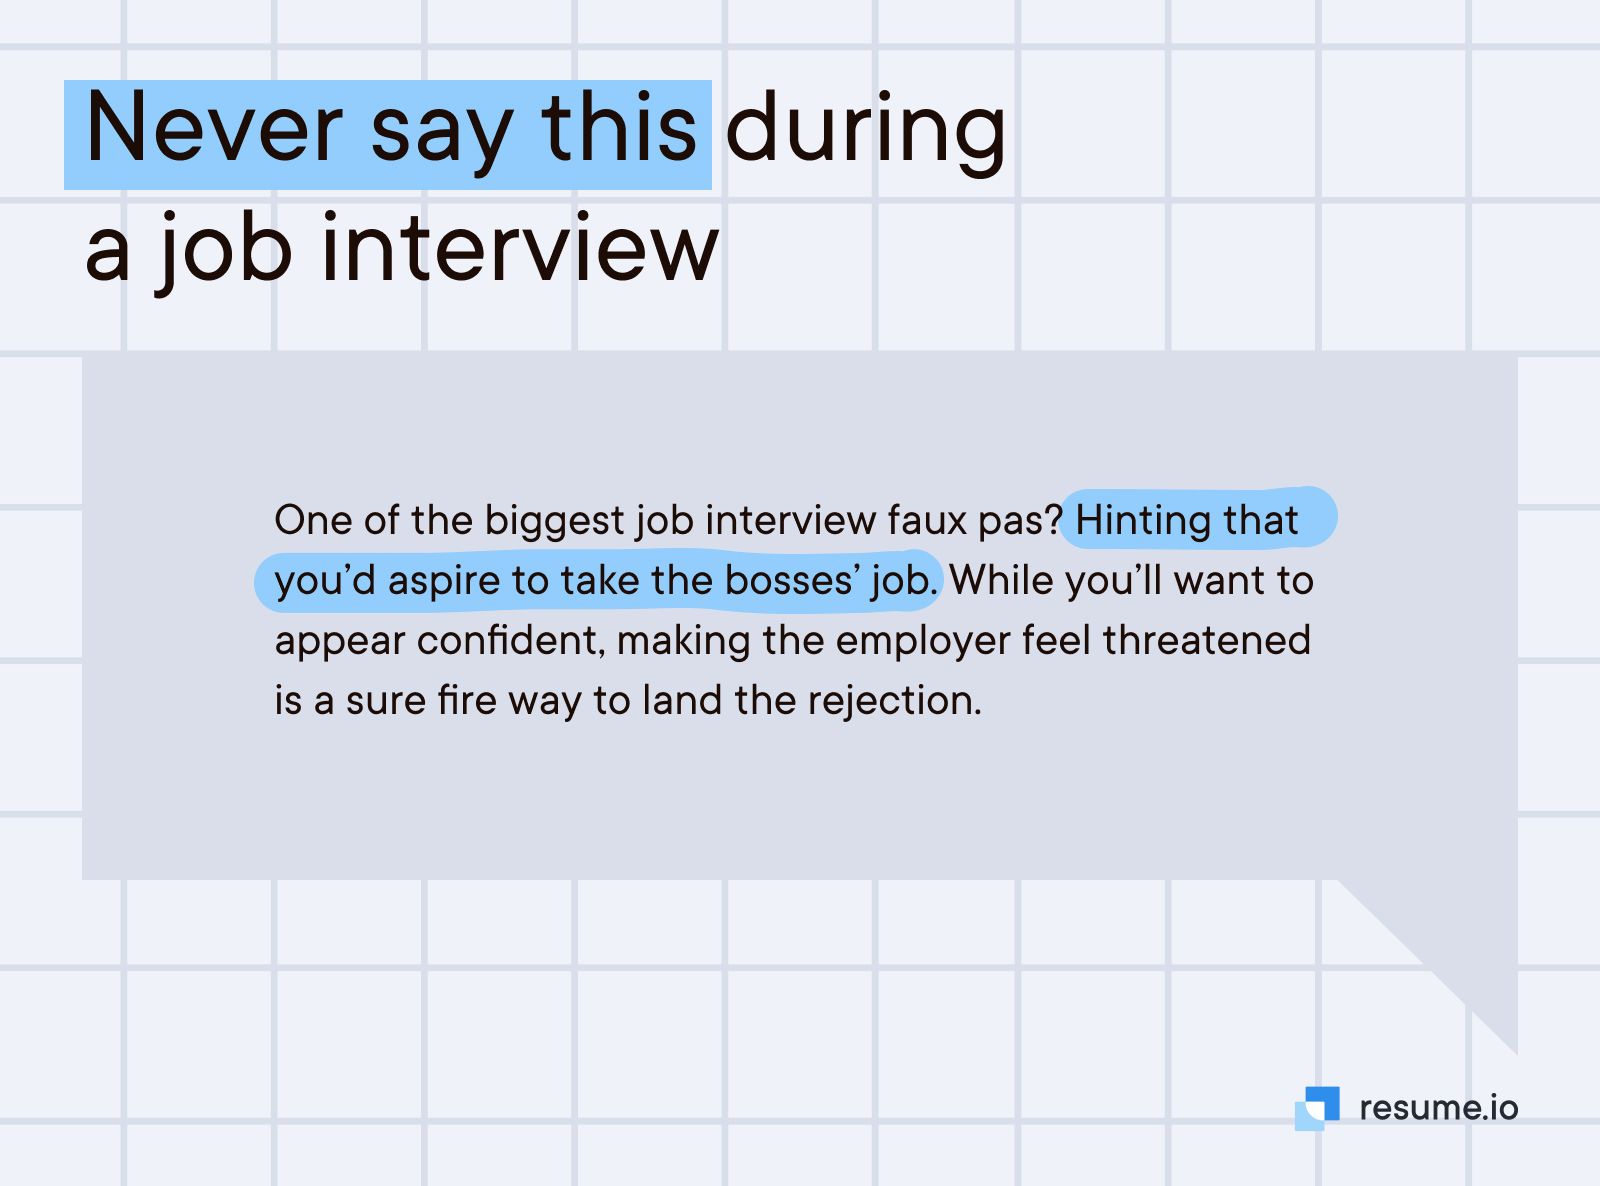 Never say this during a job interview